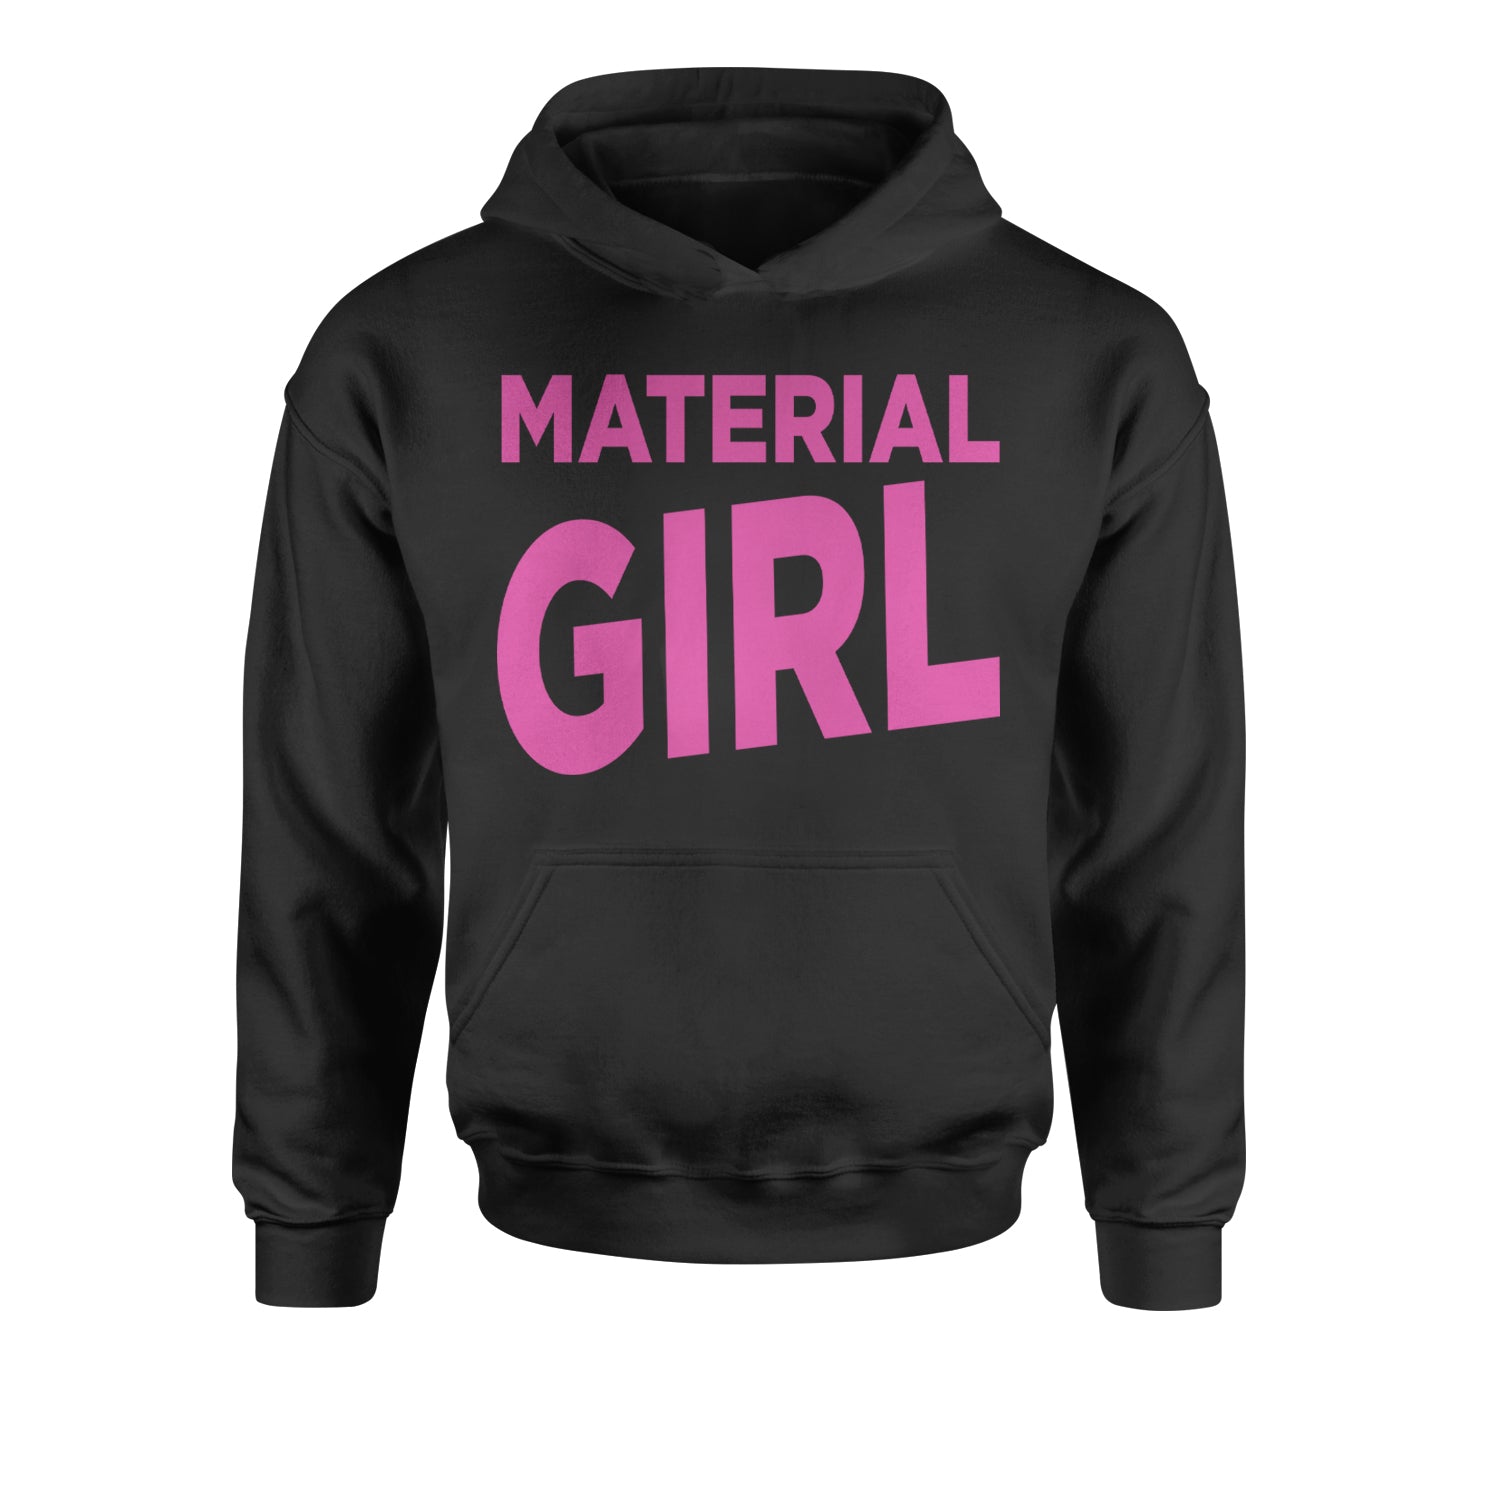 Material Girl 80's Retro Celebration Youth-Sized Hoodie